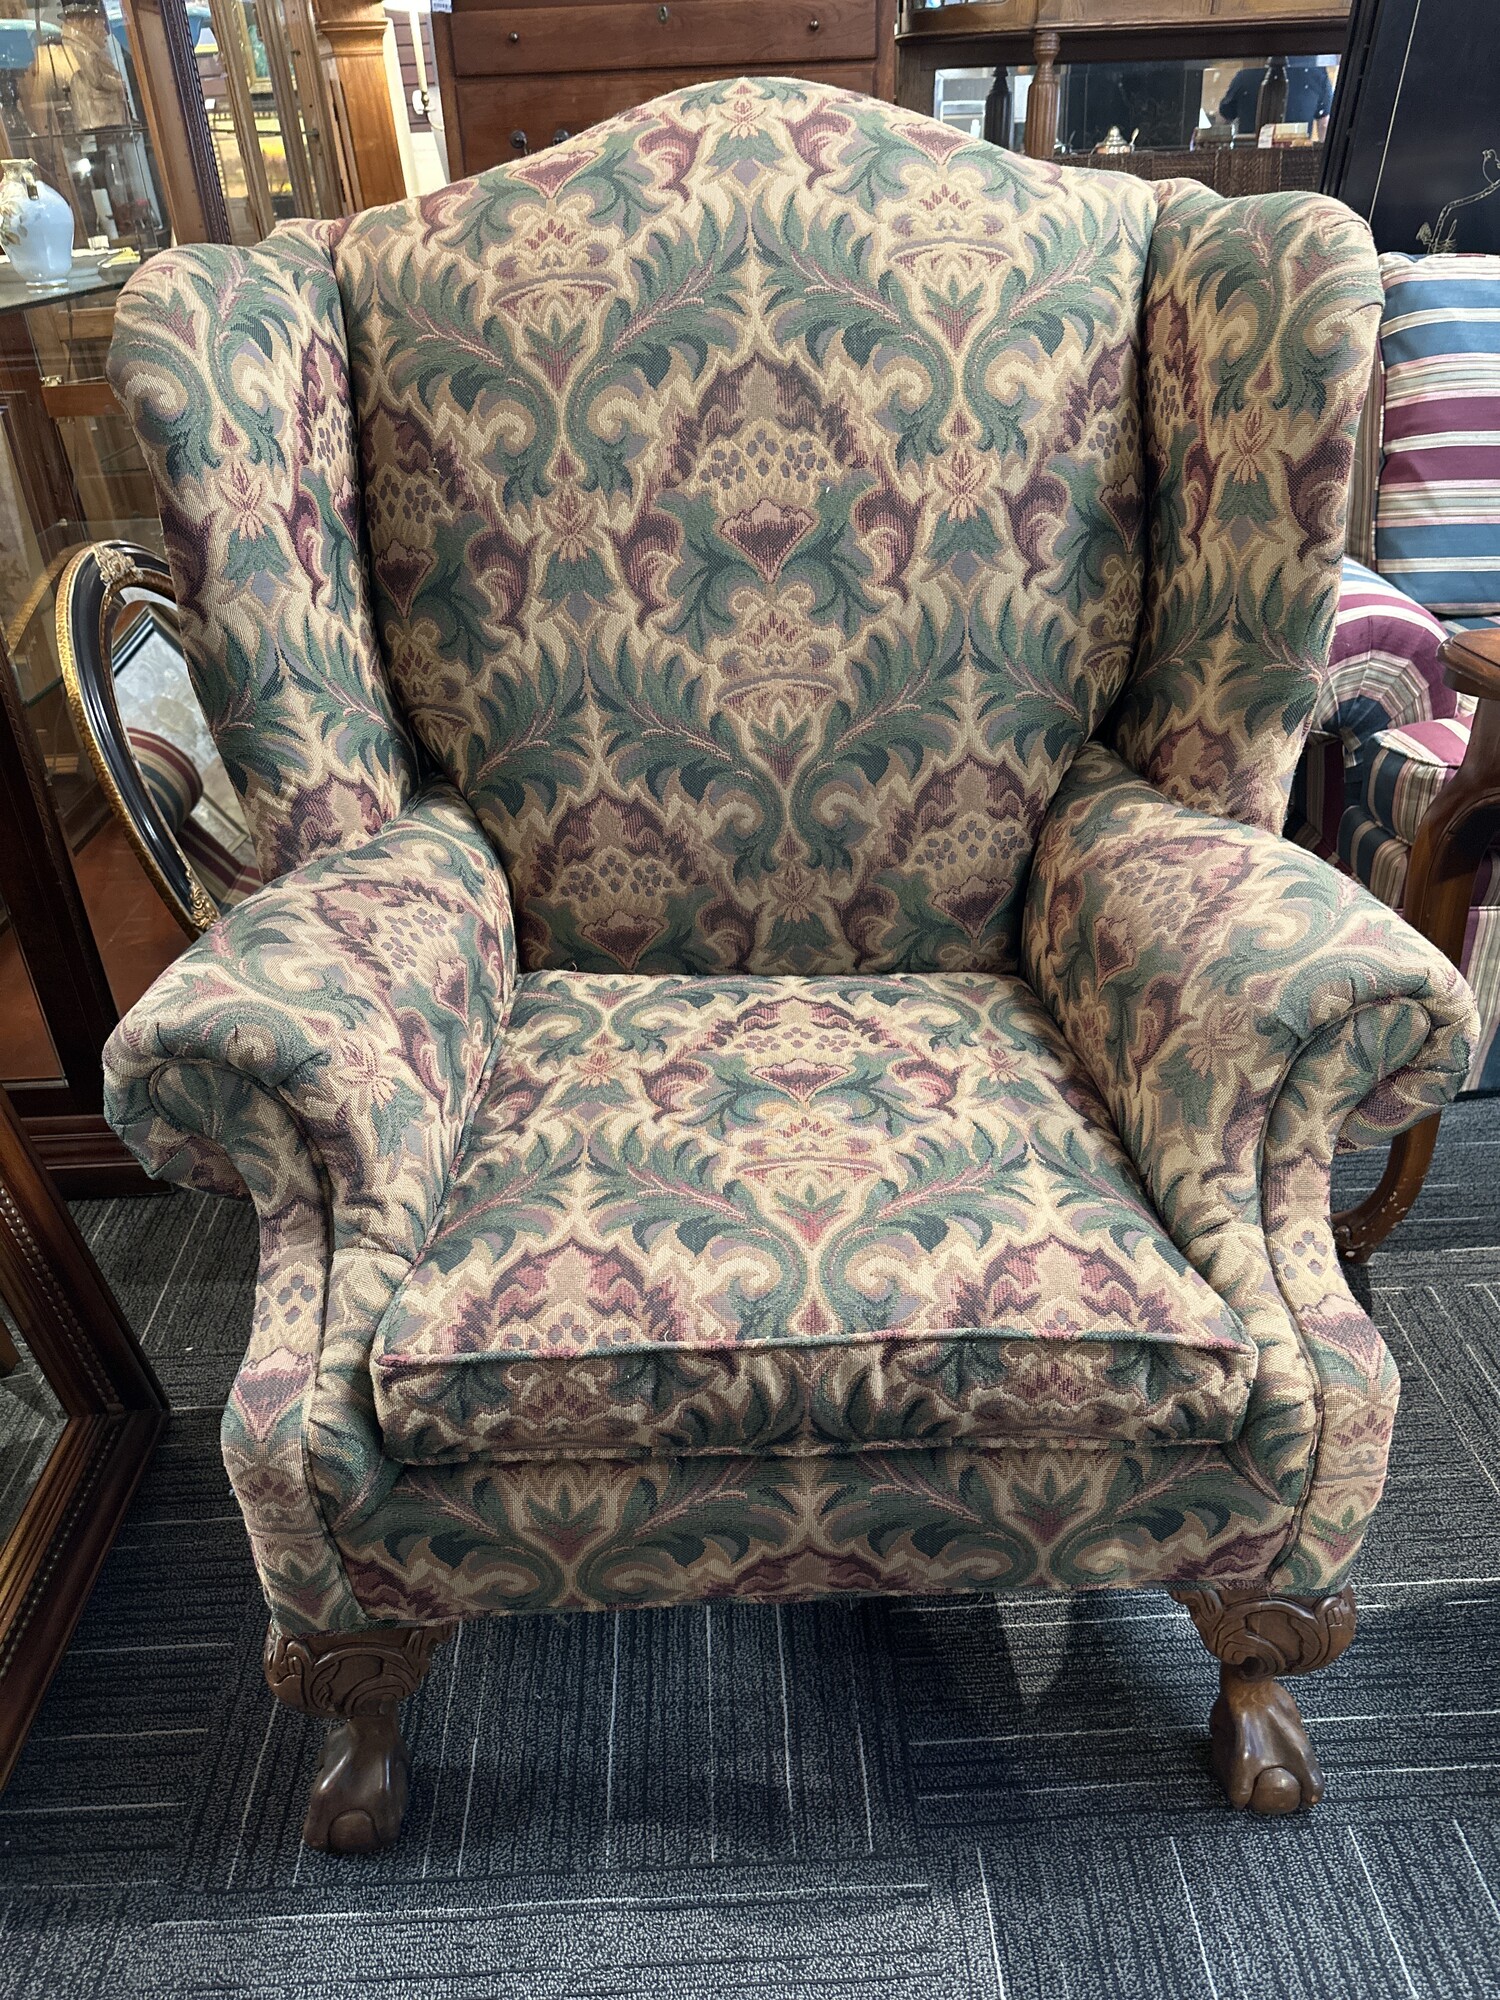 Large Wingback Chair by Craftmaster. Claw foot. 48 1/2â€ tall. 37 1/2â€ wide. 27 1/2â€ deep.